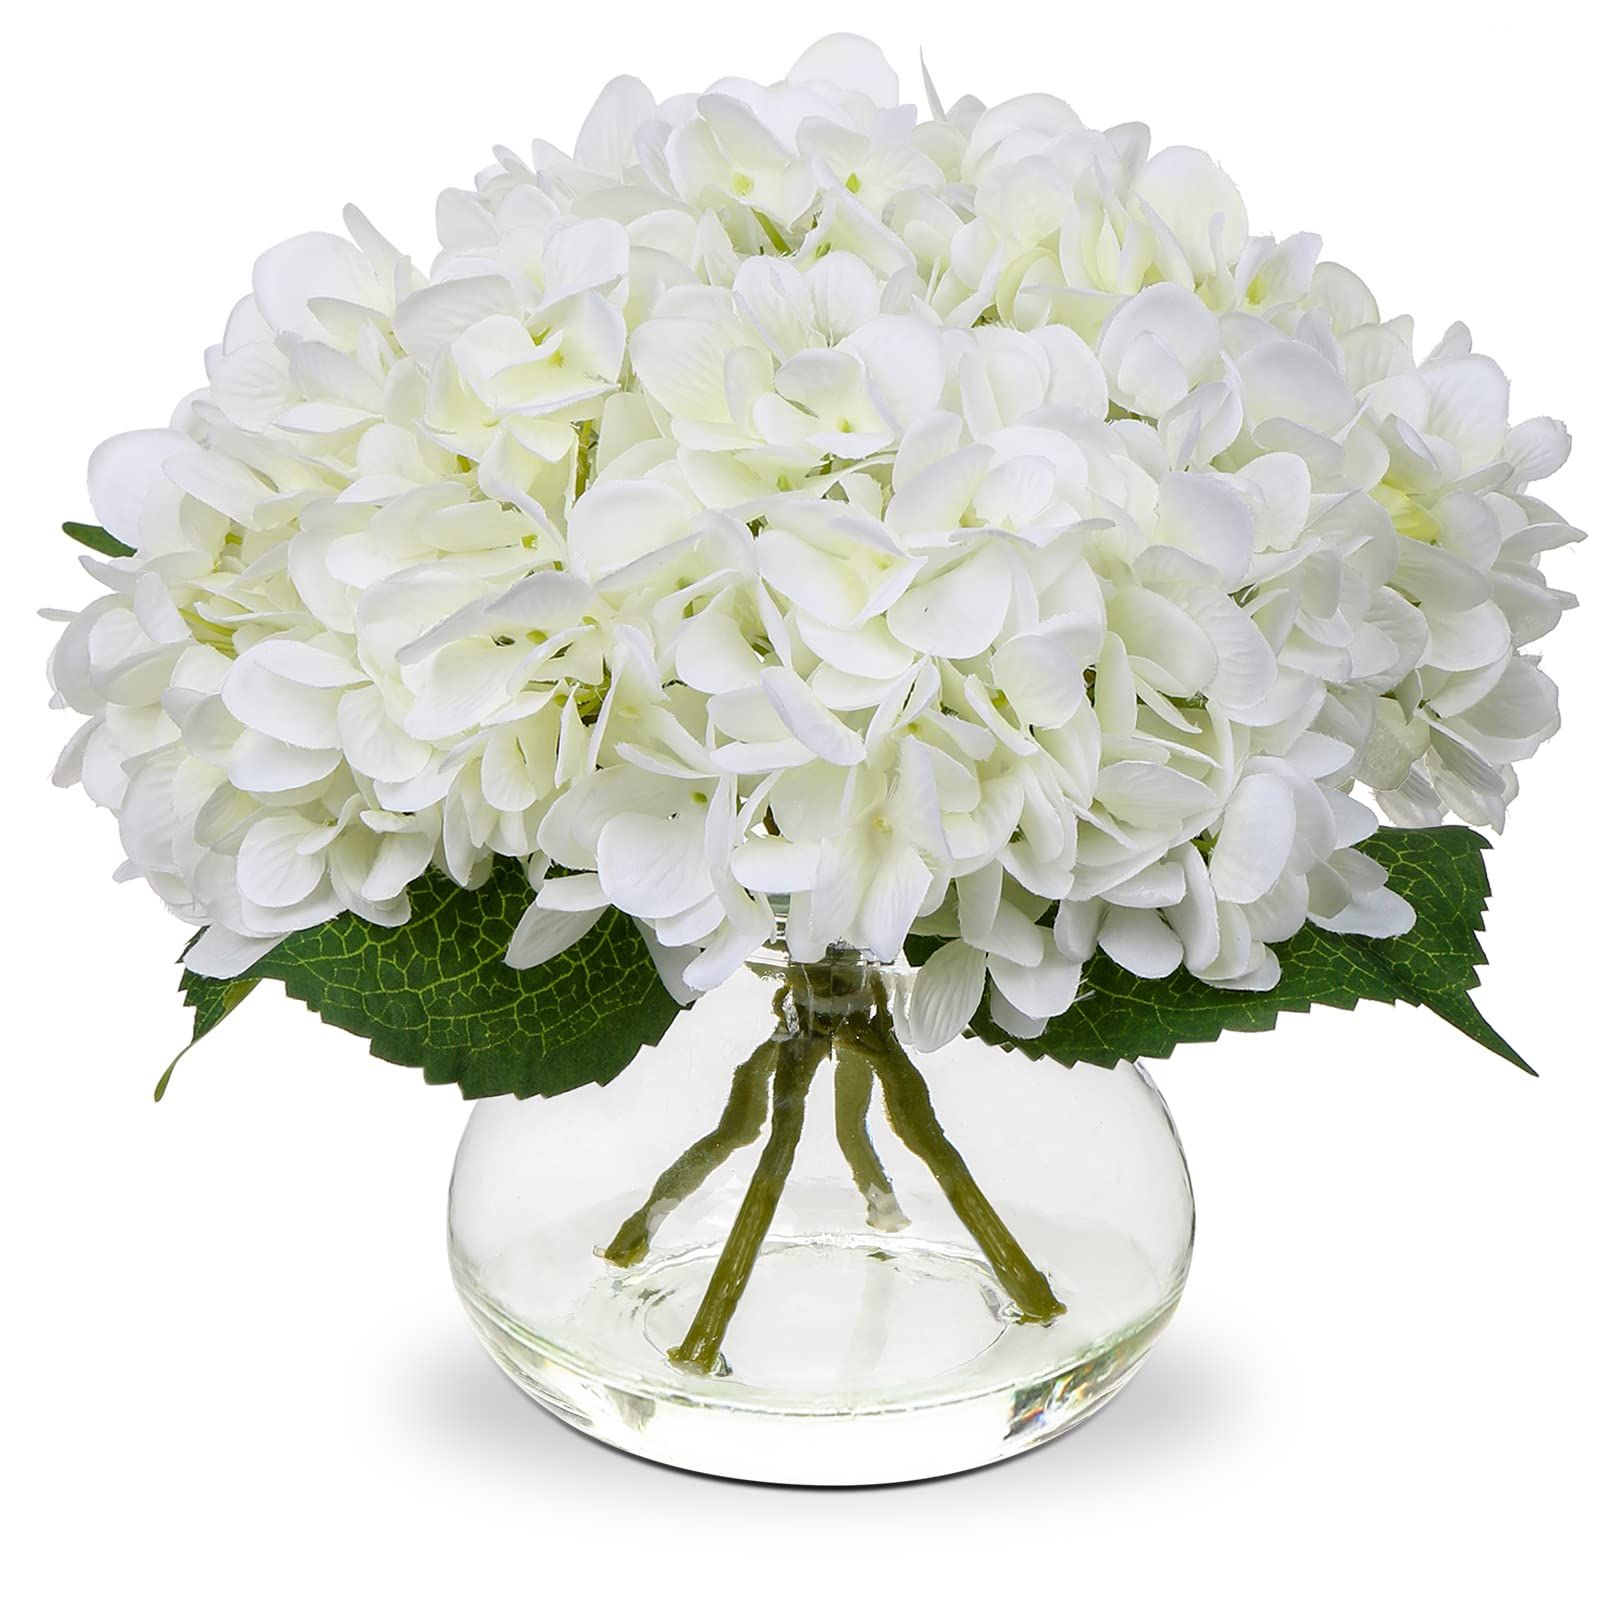 Hollyone Hydrangea Artificial Flowers with Vase White Silk Fake Flowers Arrangements in Glass Vase with Faux Water for Home Bathroom Office Table Centerpiece Shelf Decorations | Amazon (US)